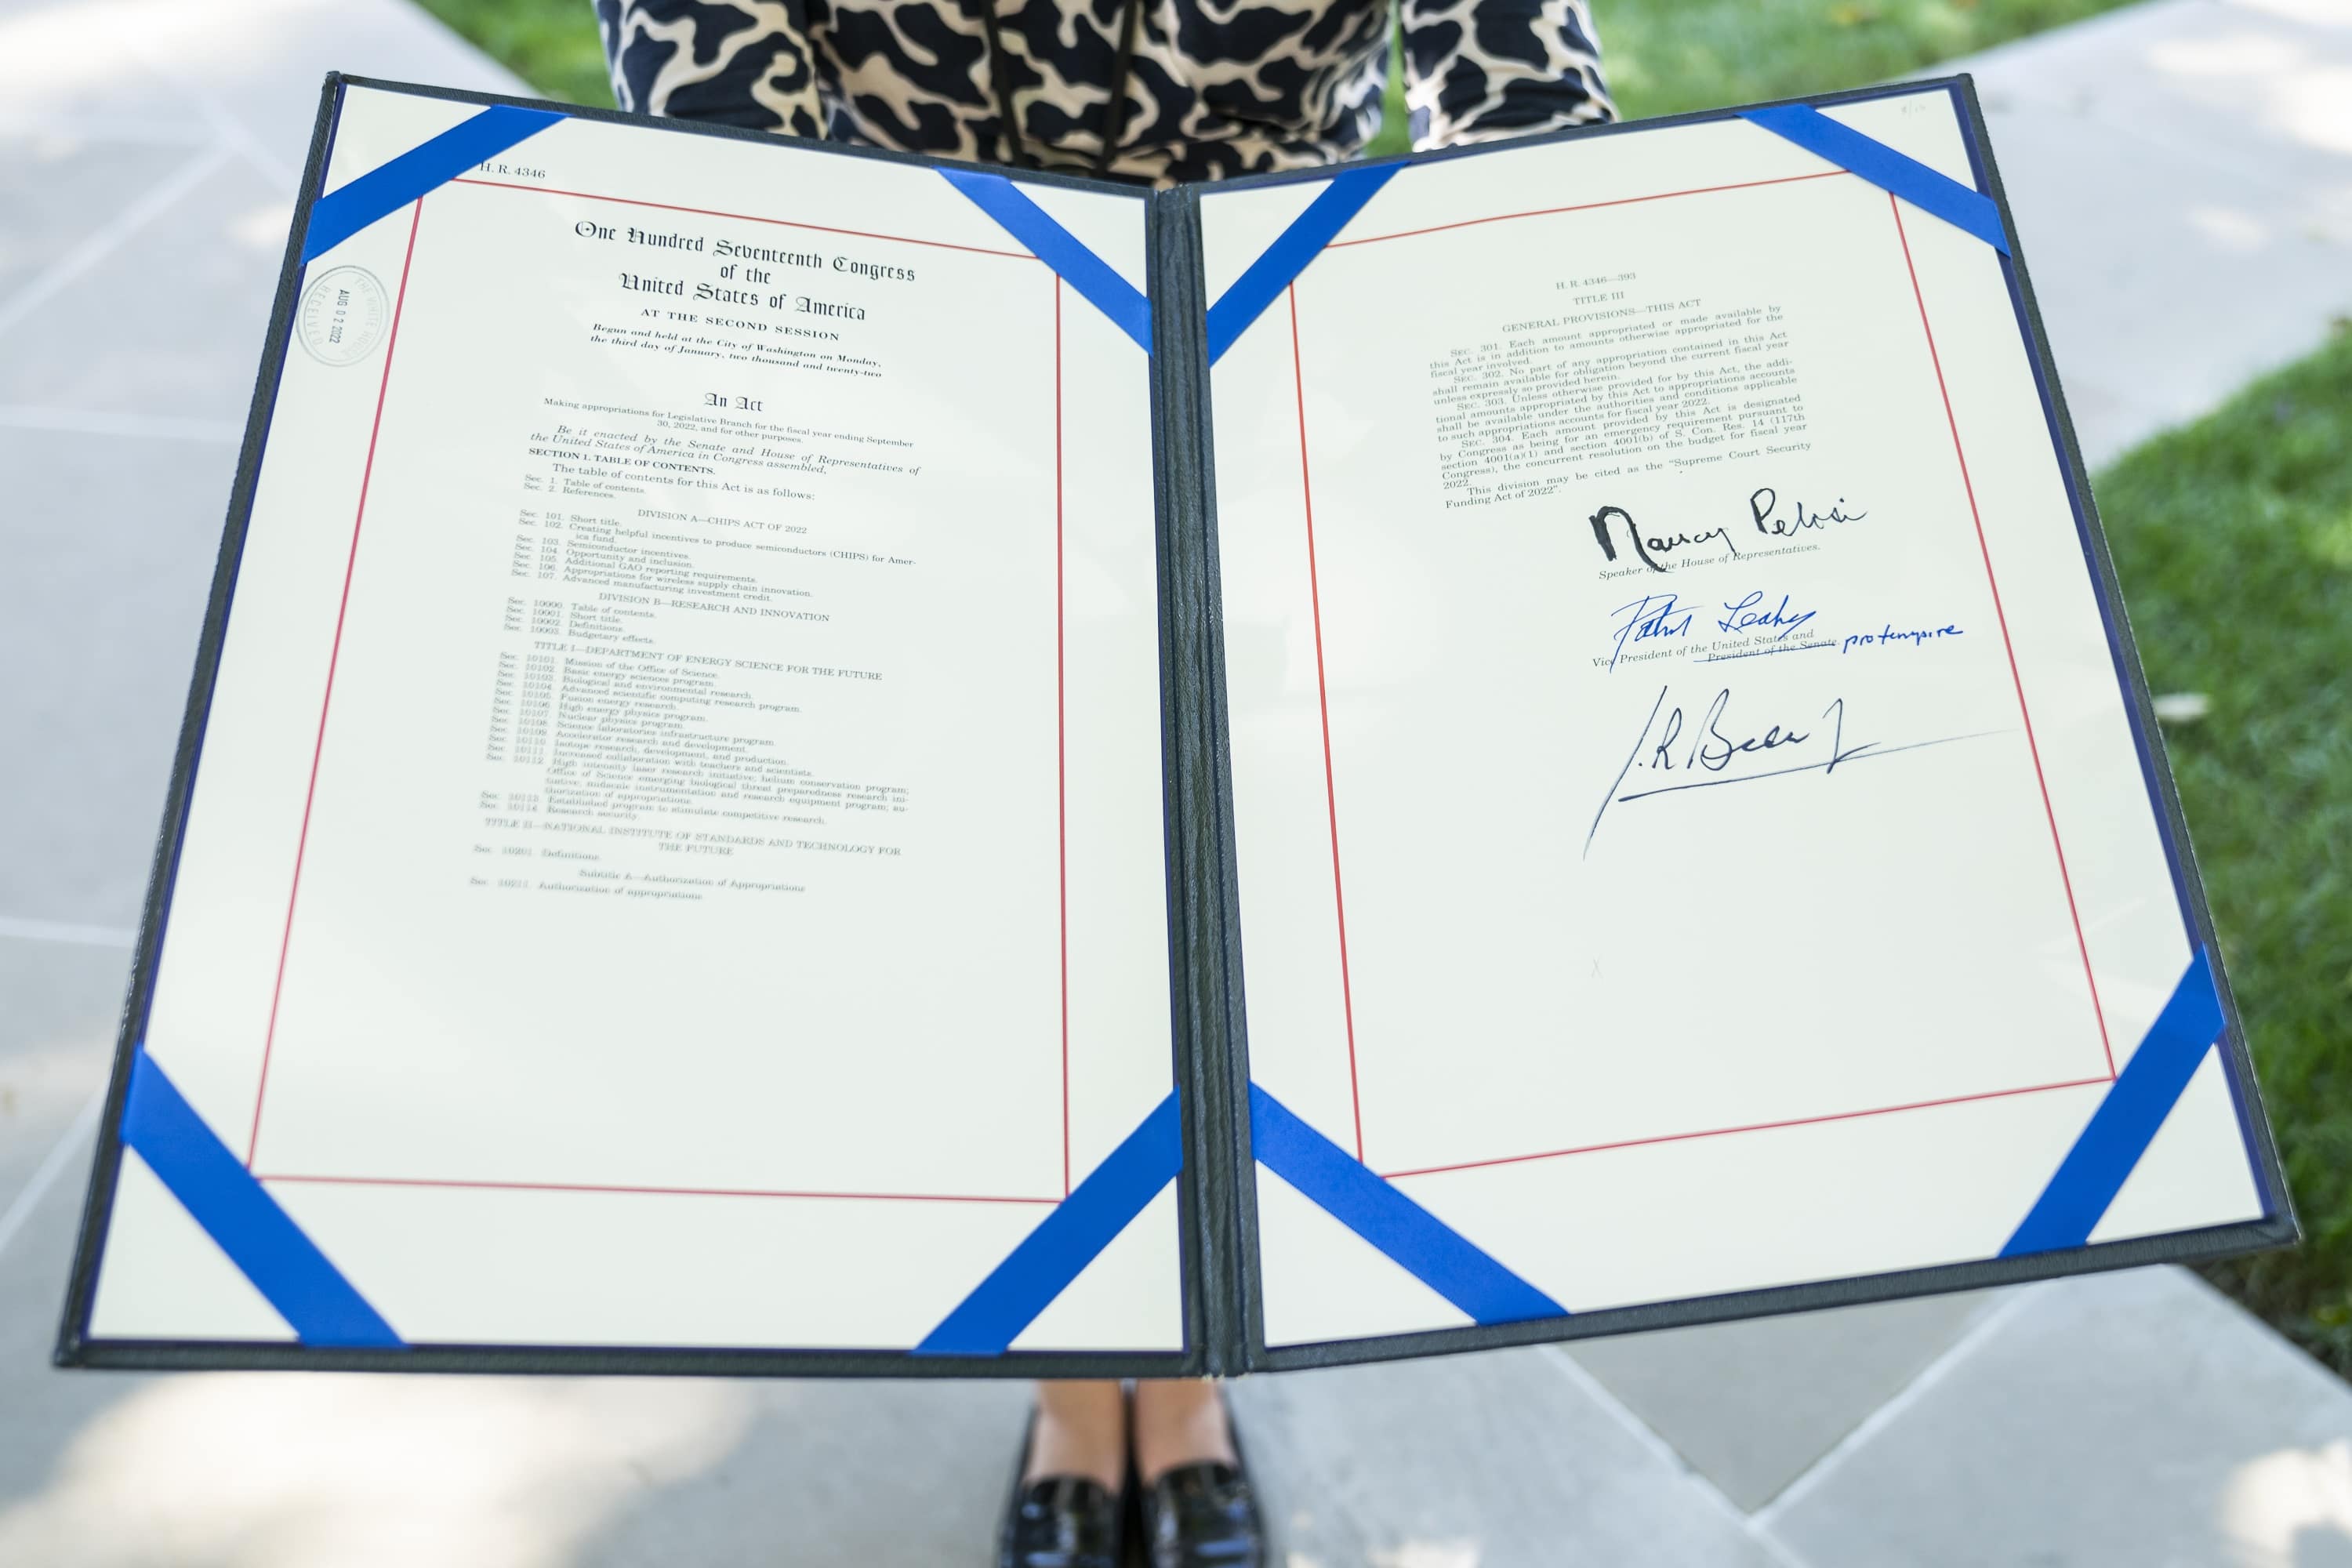 On 9 August 2022, US President Joe Biden signed the US$280 billion CHIPS and Science Act to support the domestic technology industry (White House/Hannah Foslien/Flickr)